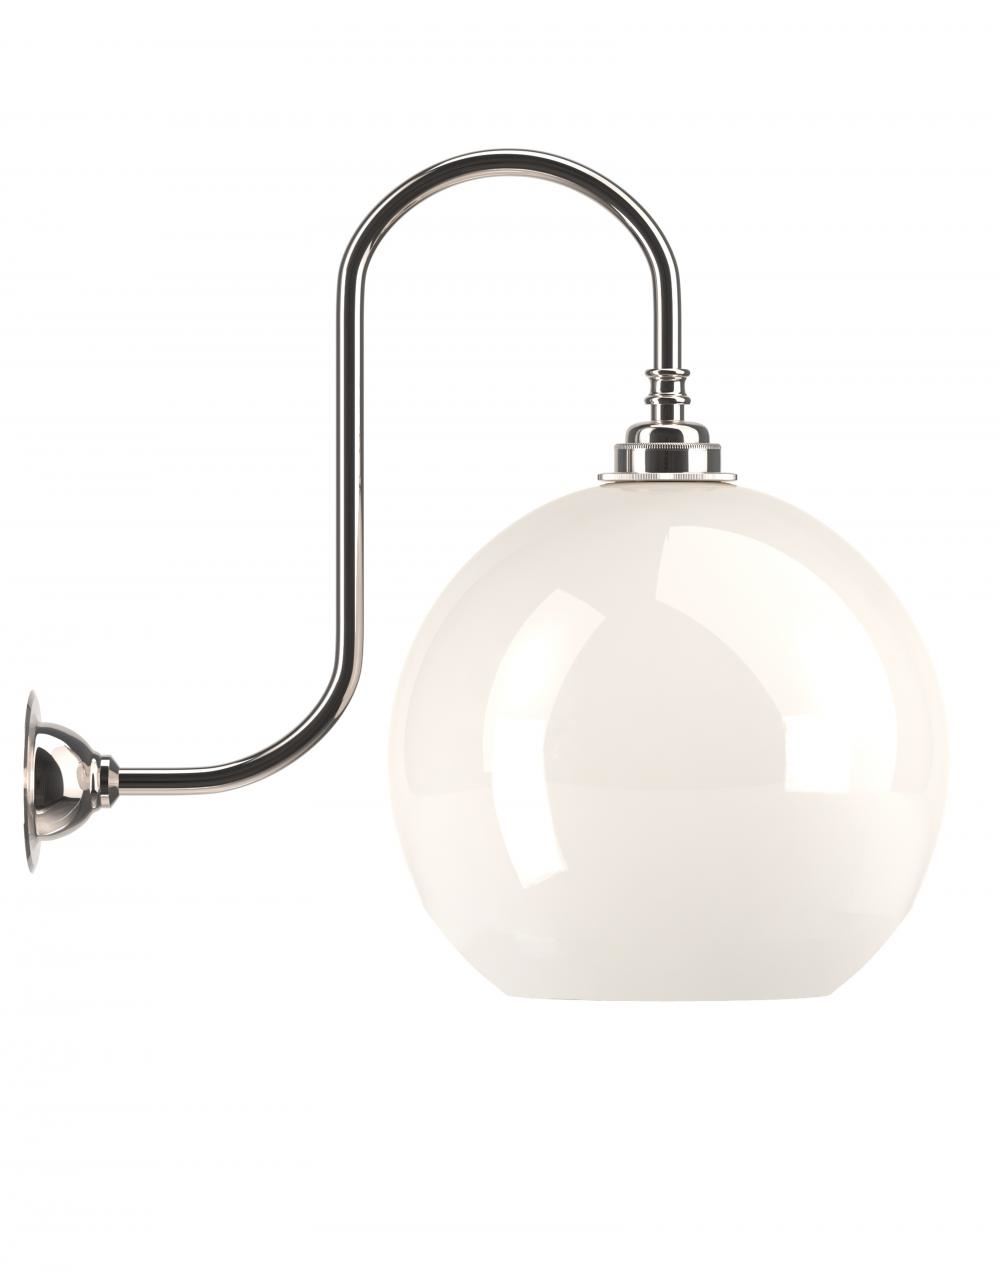 Hereford Swan Neck Wall Light Large White Nickel